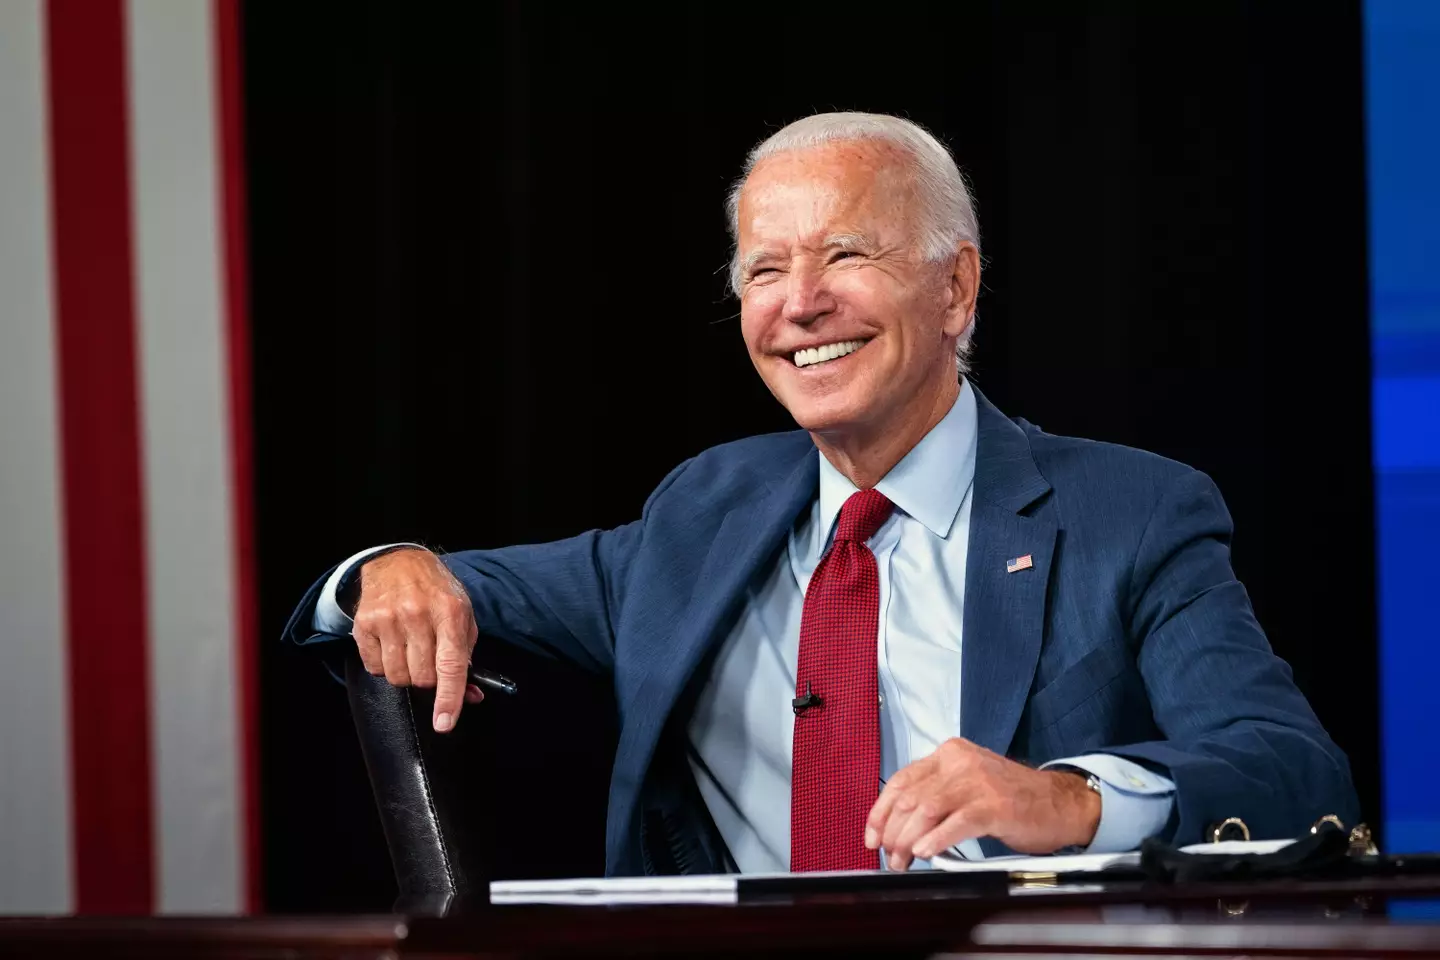 Biden called on governors to follow in his footsteps.